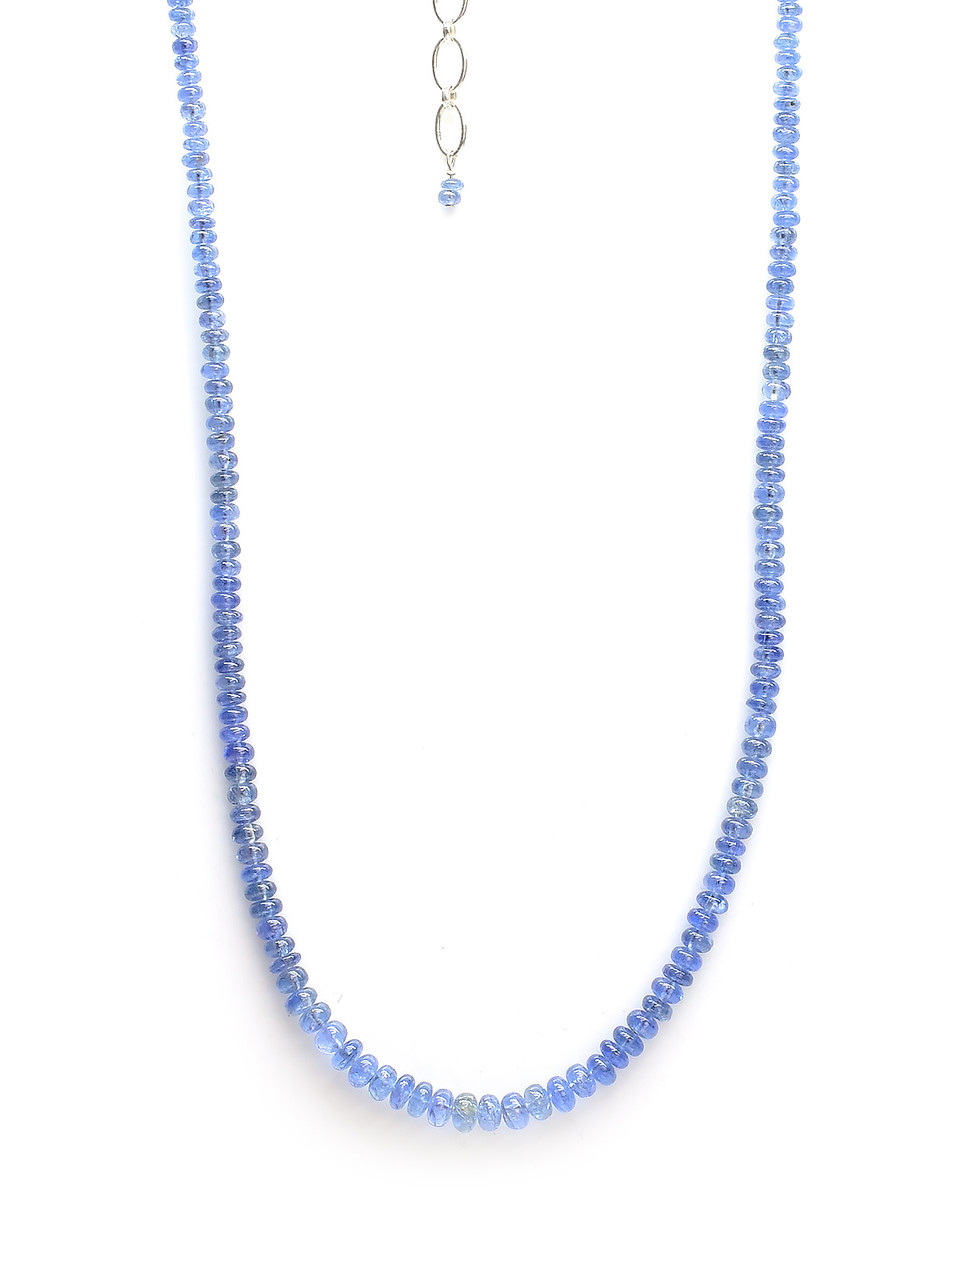 Blue Sapphire Necklace - 1125-RUP-01 - Exquisite Crystals